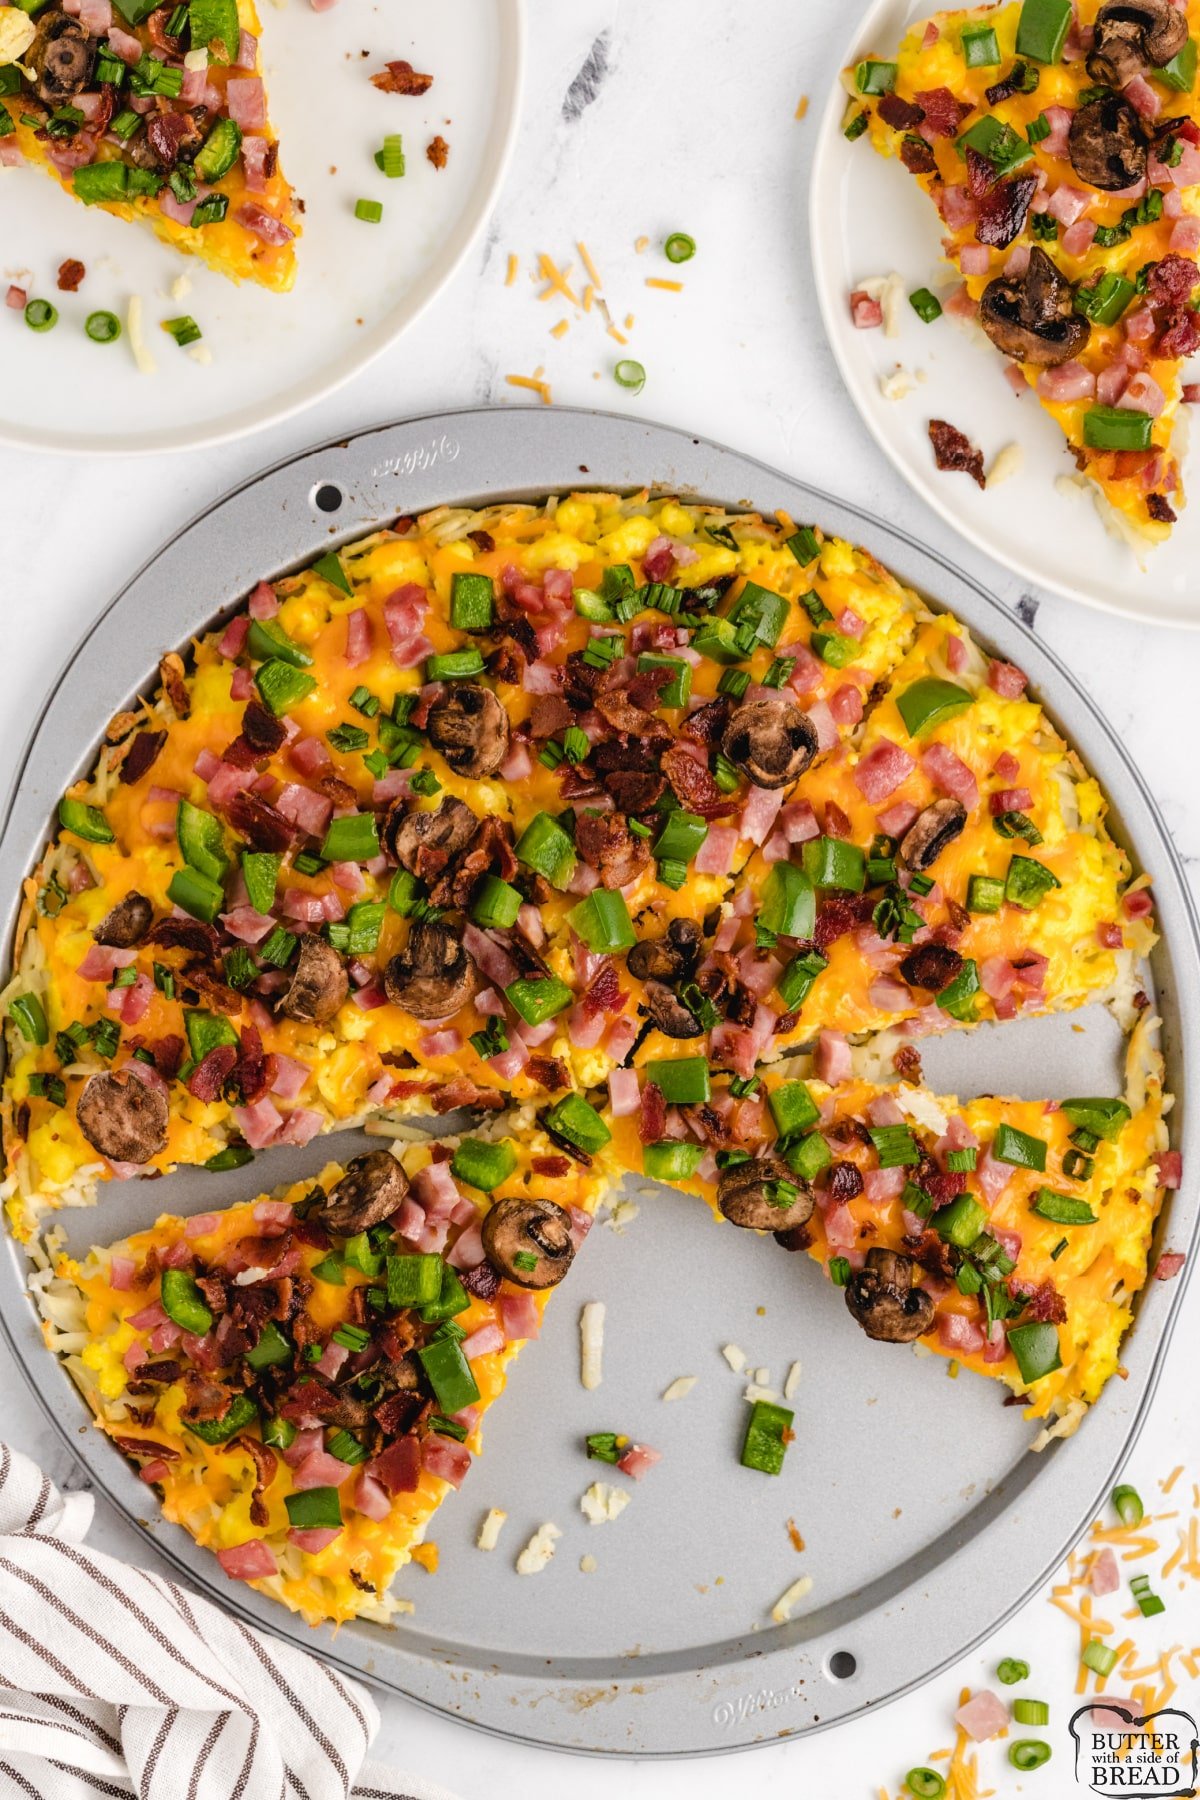 Breakfast pizza made with eggs, cheese and veggies